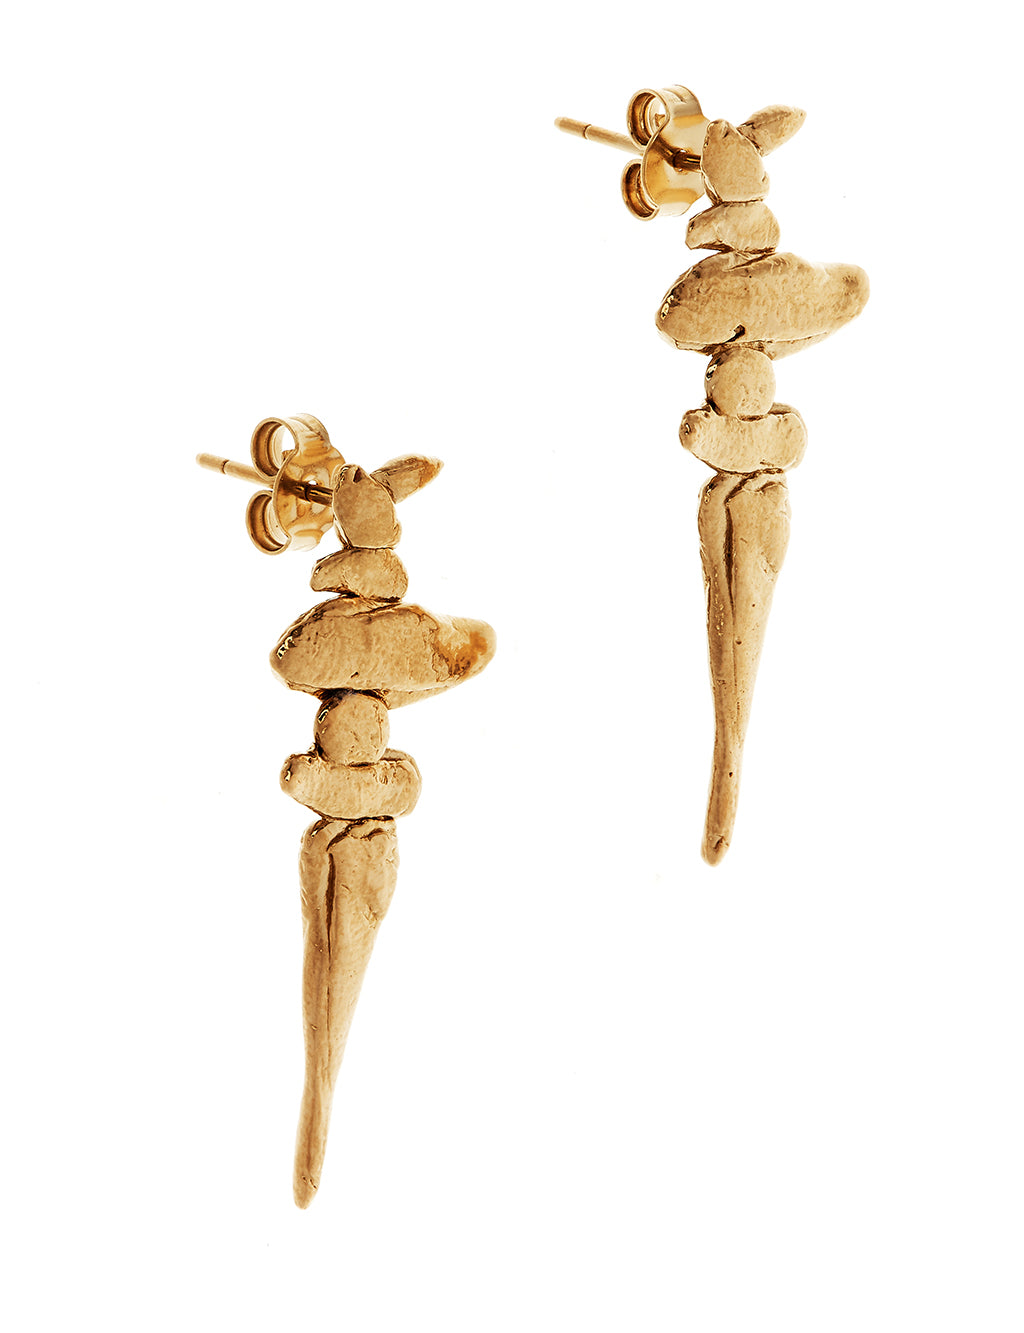 Side view of gold vermeil earrings showing the post and butterfly back